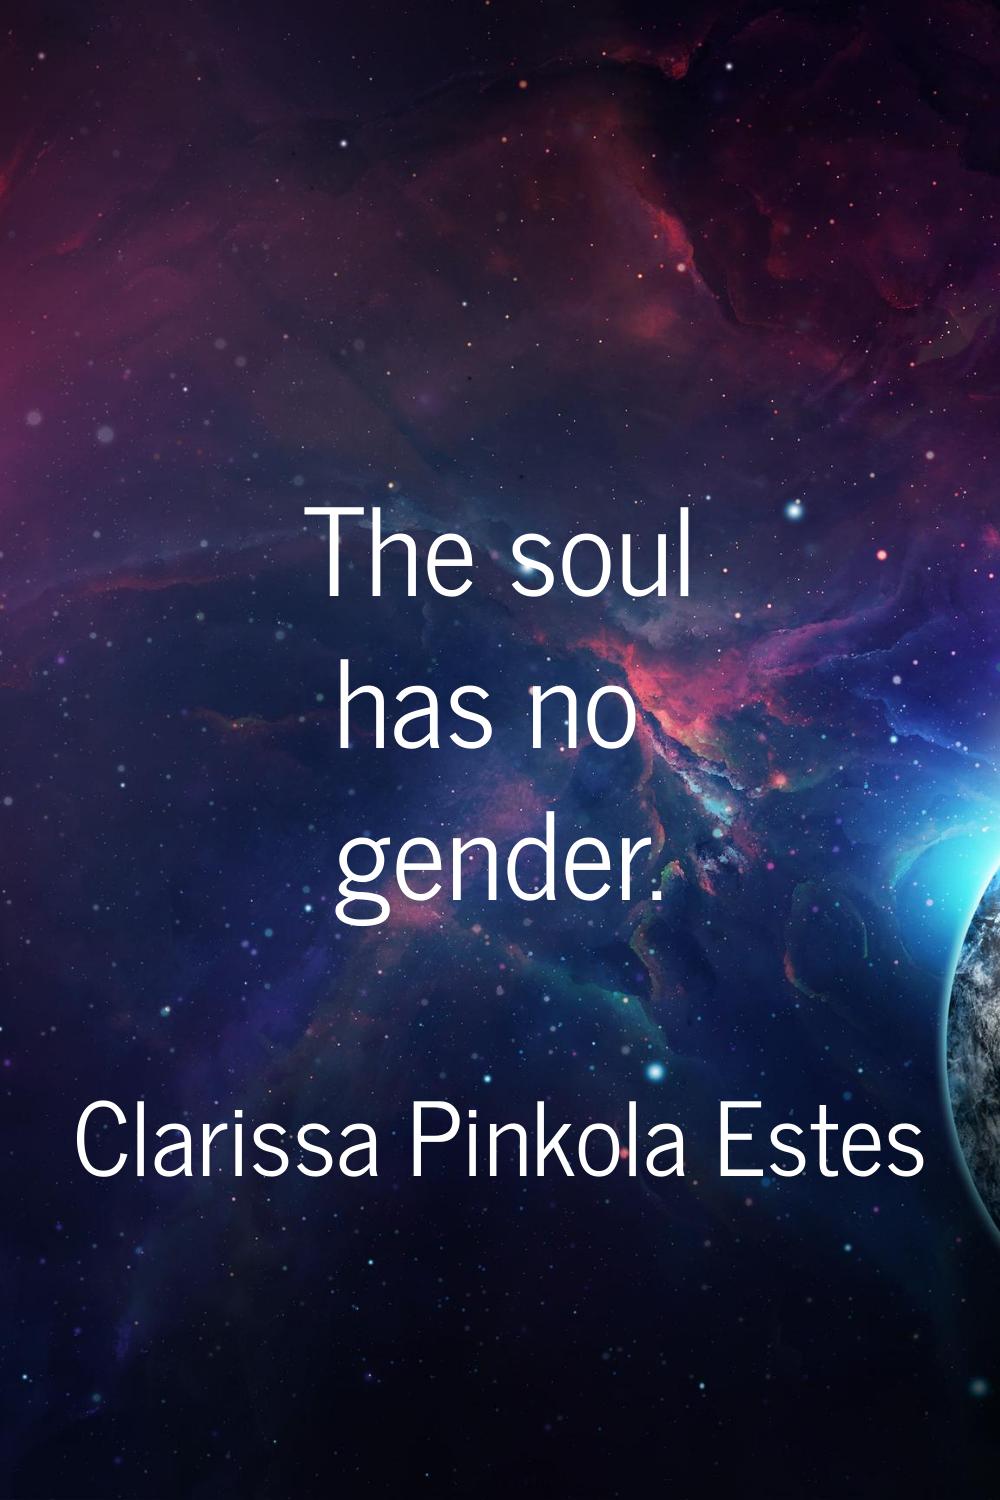 The soul has no gender.